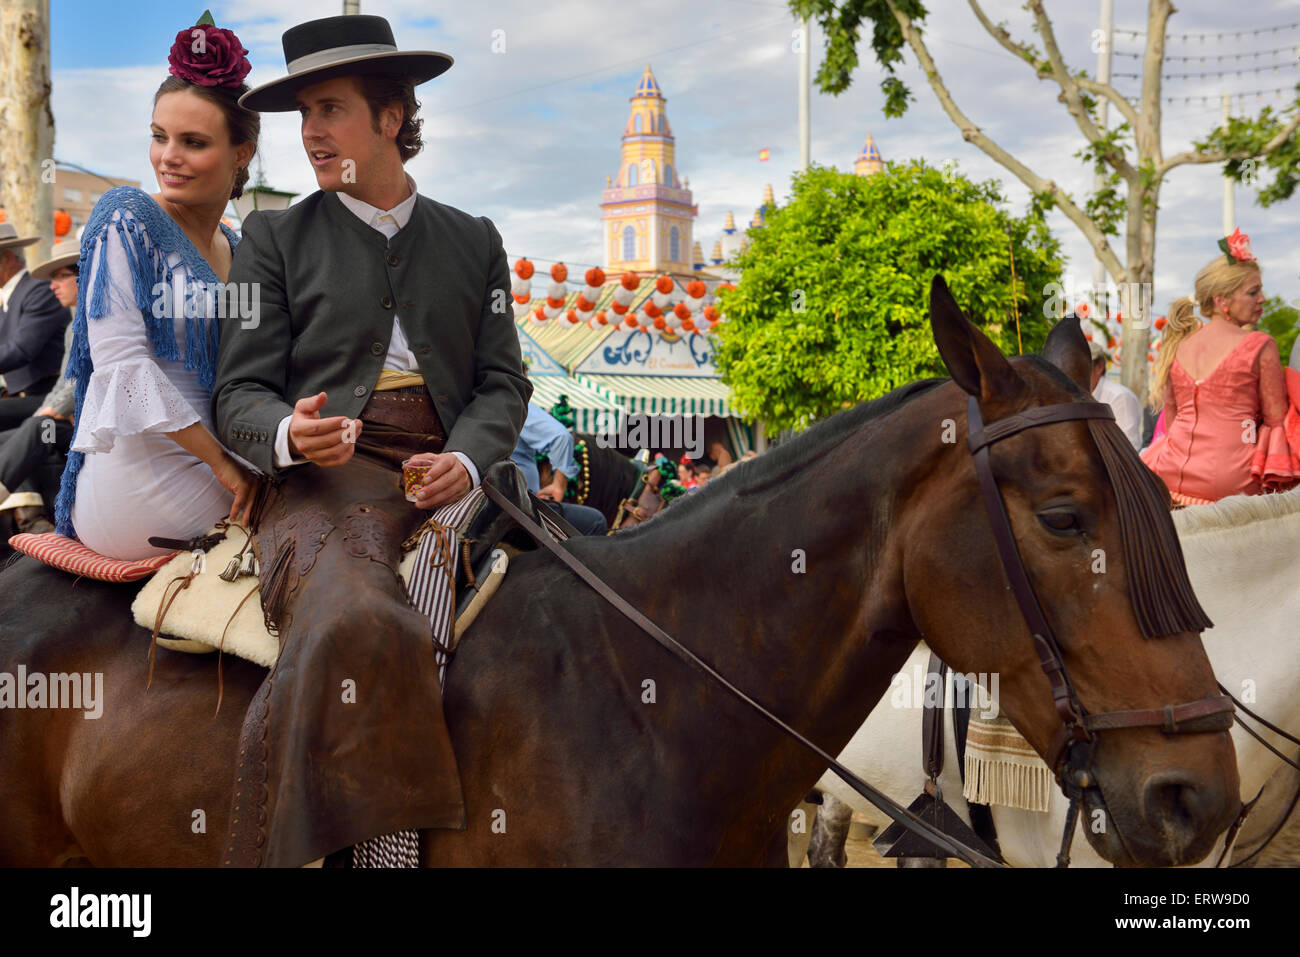 Handsome man and beautiful woman drinking on horseback with 2015 Main Gate of the Seville April Fair Spain Stock Photo